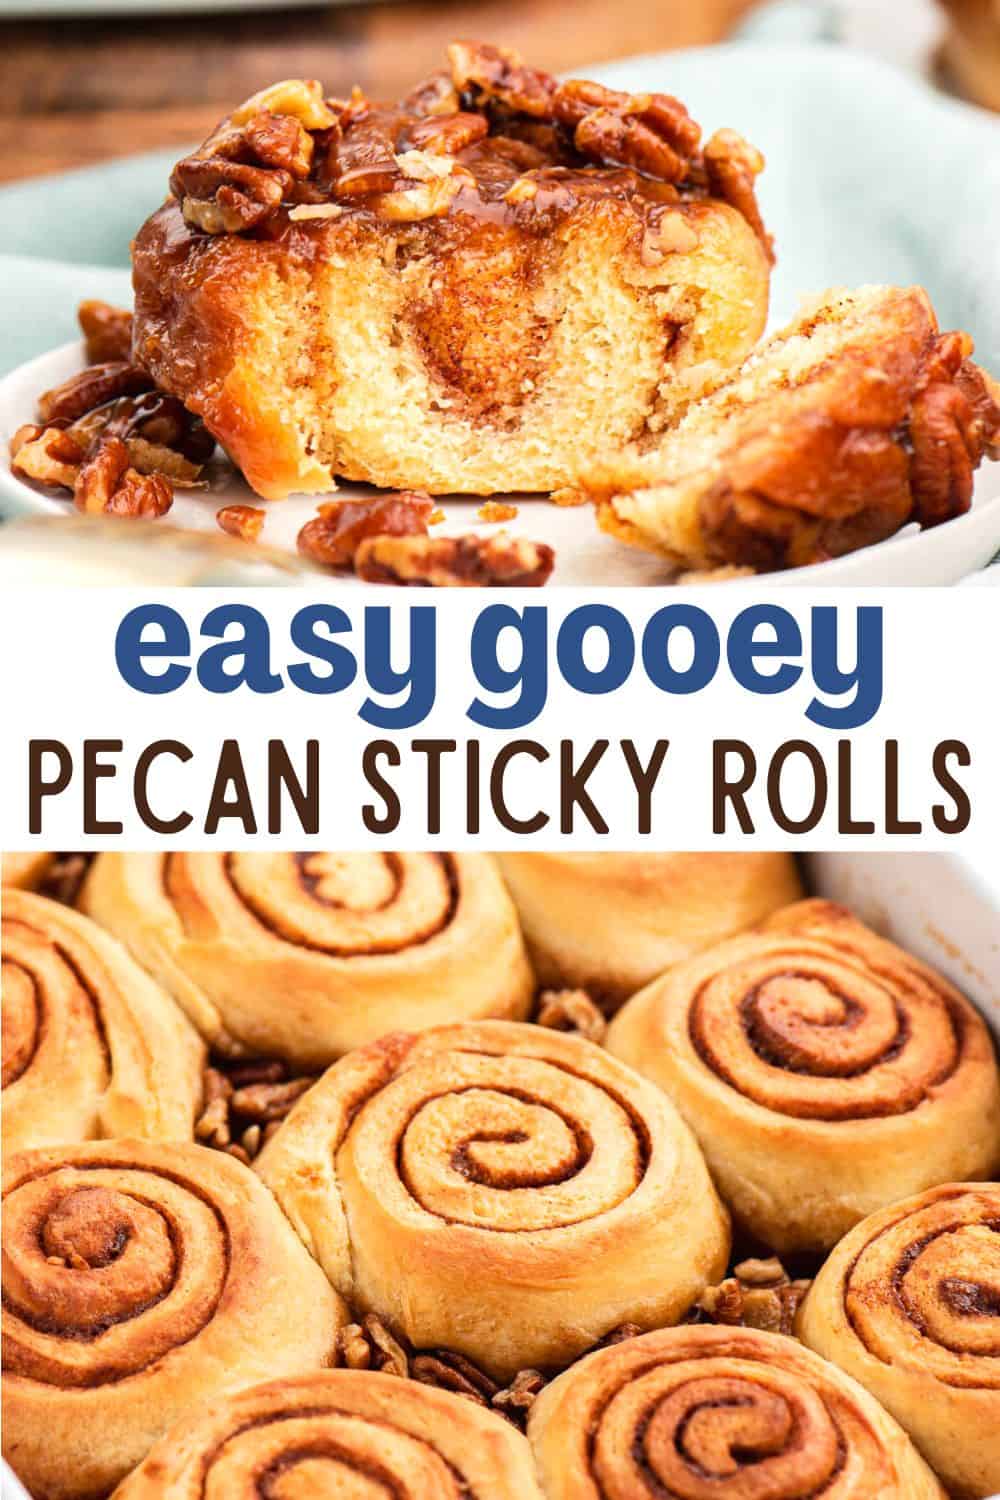 Pecan sticky buns are gooey cinnamon rolls for weekend and holiday brunch. These sticky rolls start with an easy homemade dough and baked with a delicious caramel pecan topping.